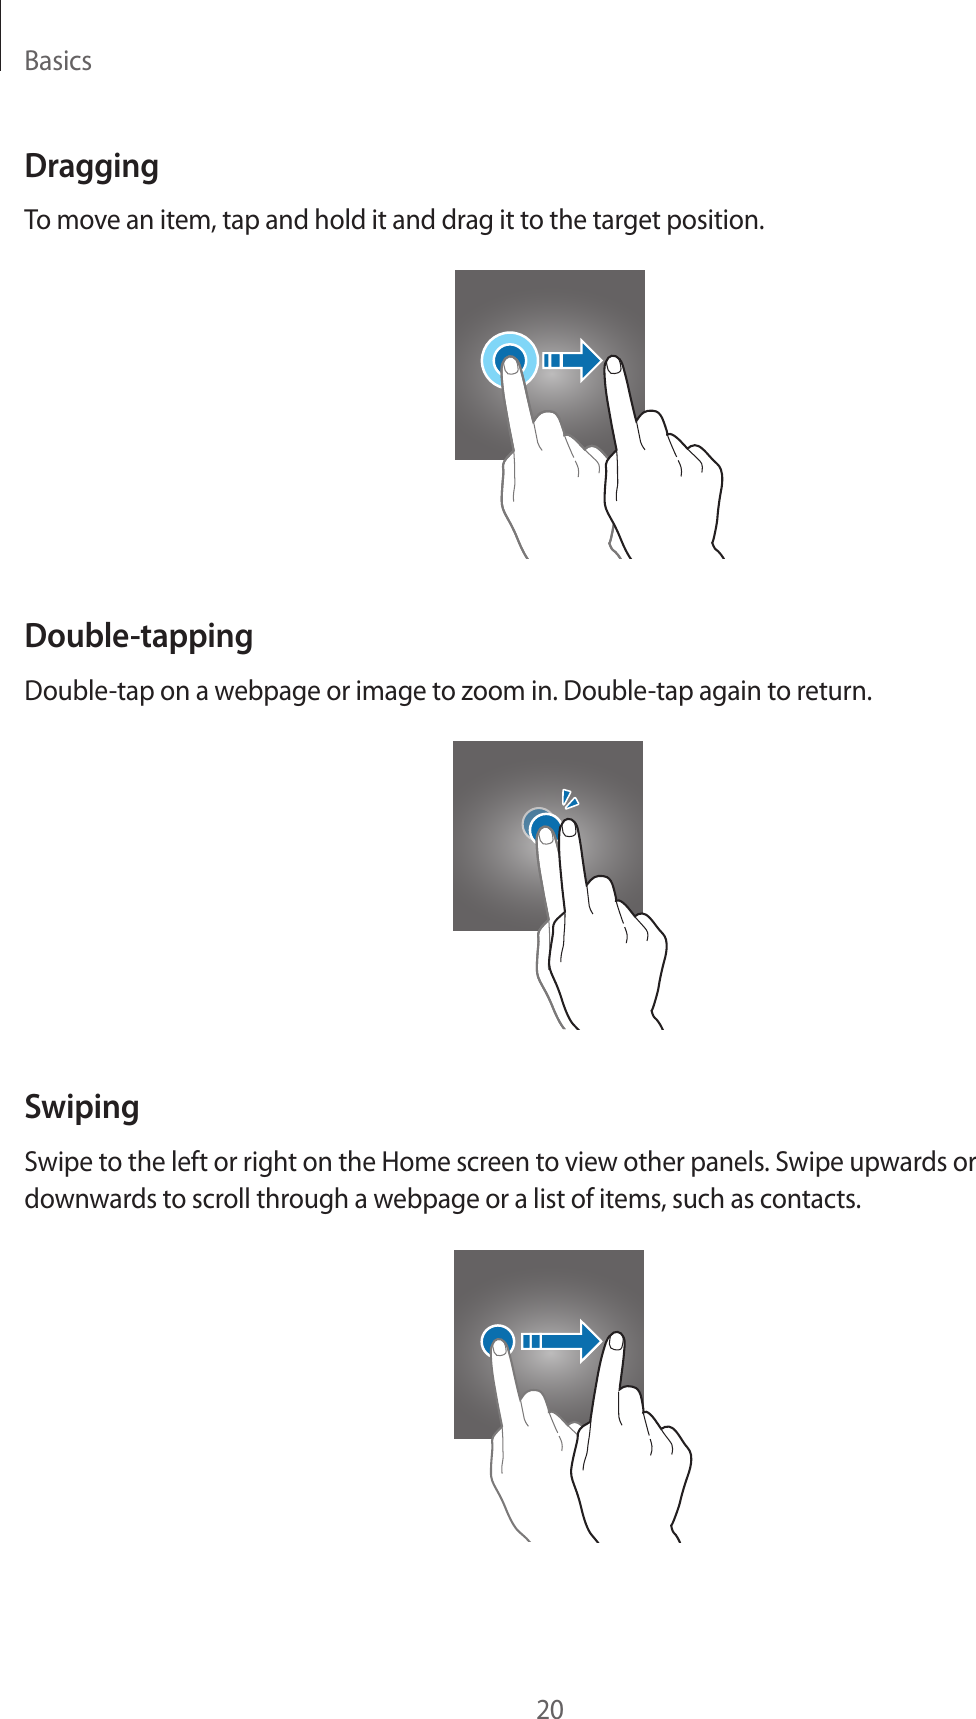 Basics20DraggingTo move an item, tap and hold it and drag it to the target position.Double-tappingDouble-tap on a webpage or image to zoom in. Double-tap again to return.SwipingSwipe to the left or right on the Home screen to view other panels. Swipe upwards or downwards to scroll through a webpage or a list of items, such as contacts.